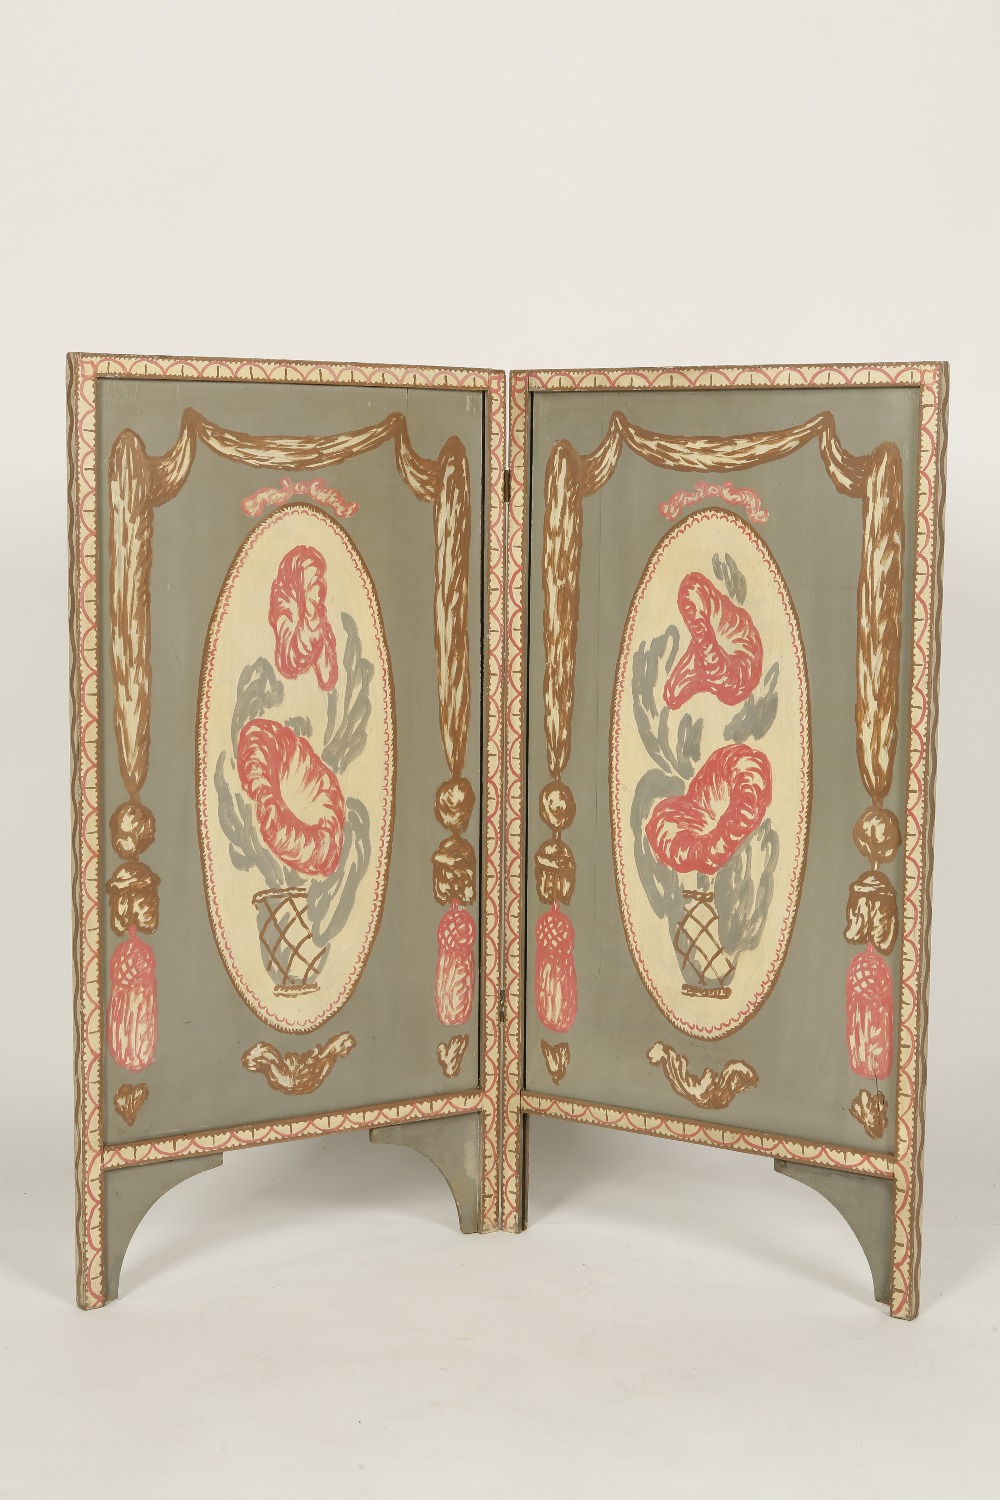 A BLOOMSBURY STYLE TWO-FOLD PAINTED SCREEN, the front decorated with oval panels of flowers in vases